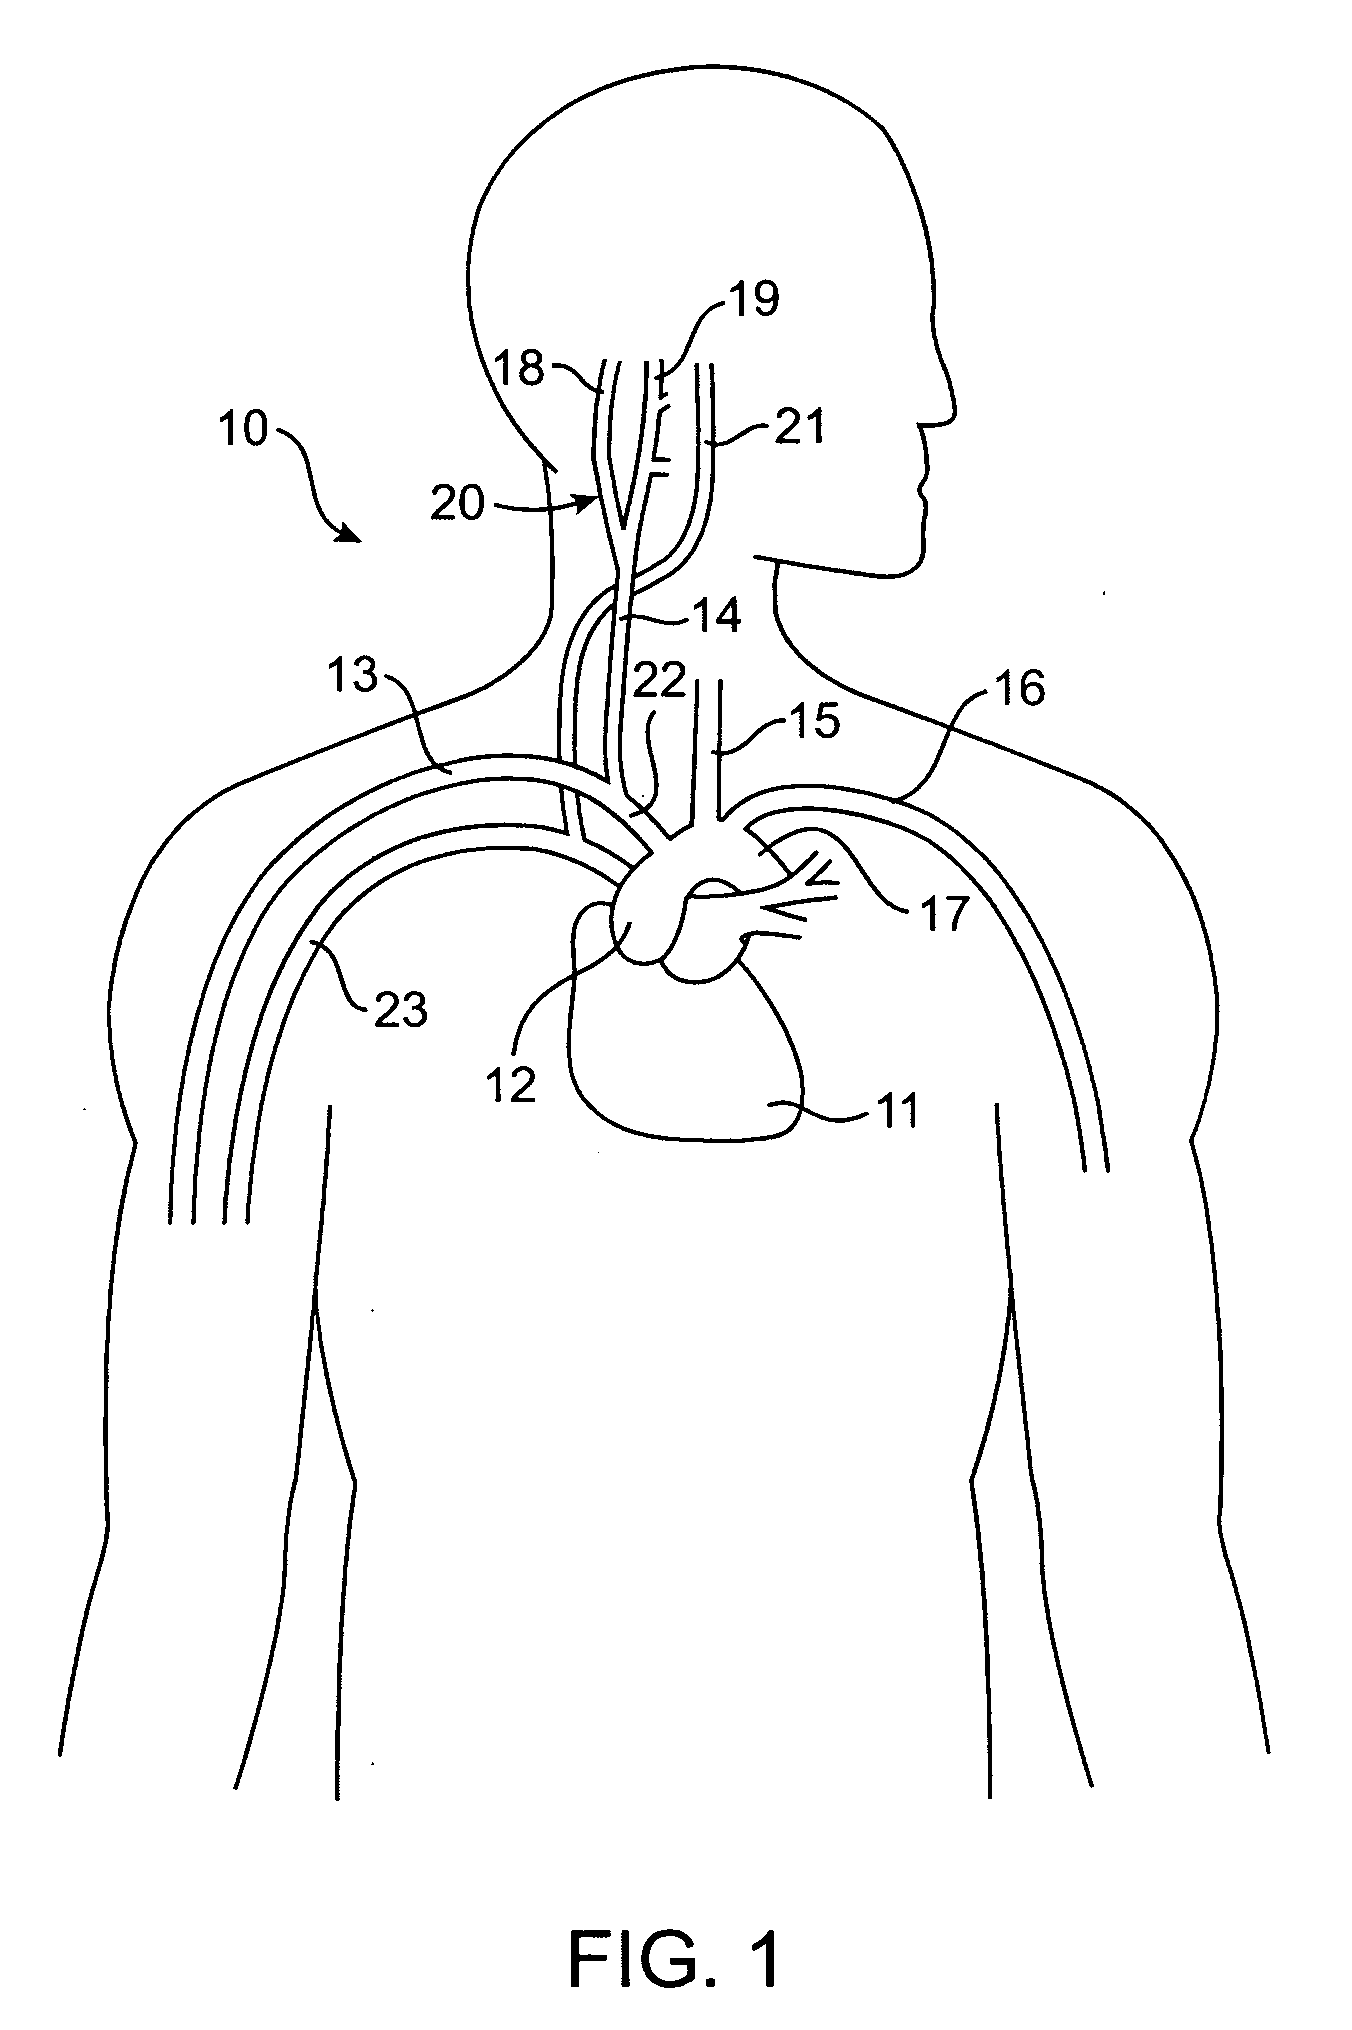 Baroreflex activation therapy with conditional shut off